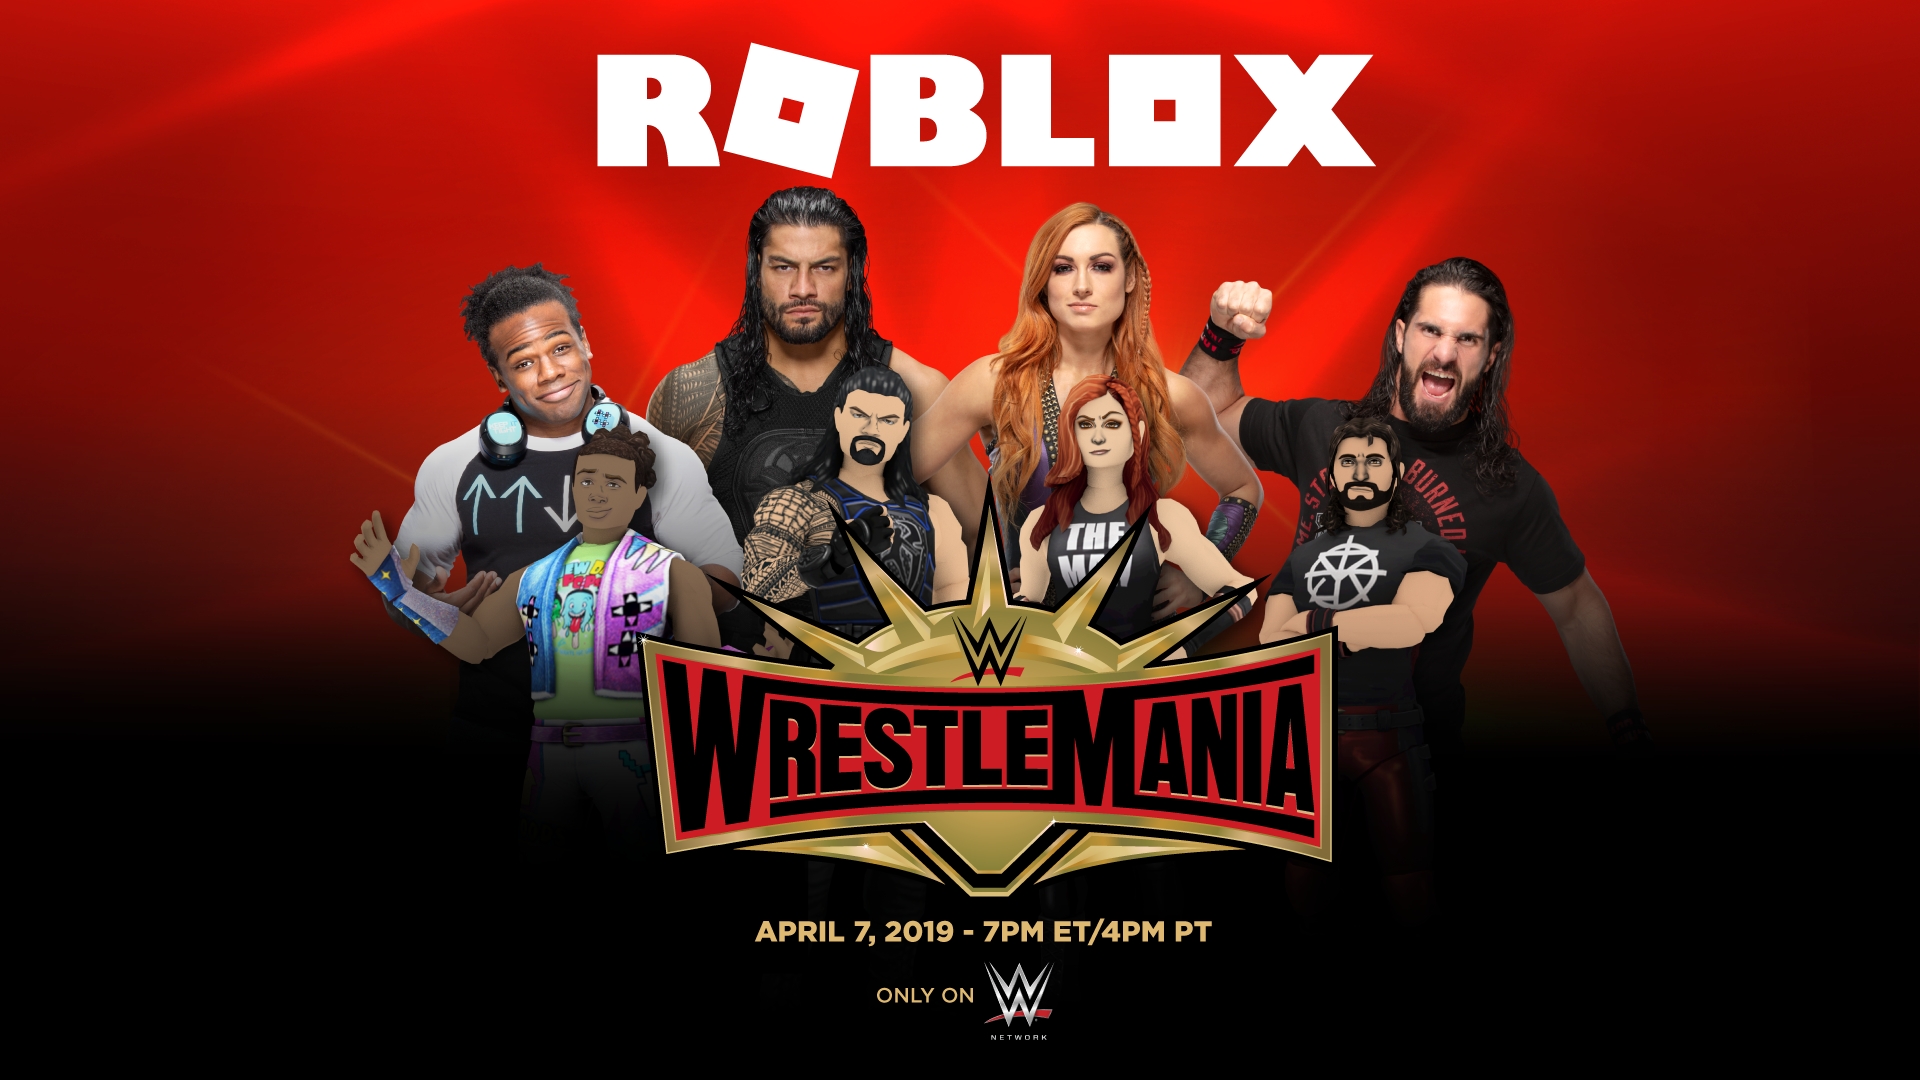 Roblox And Wwe Partner To Celebrate Wrestlemania Business Wire - thumbnail size roblox